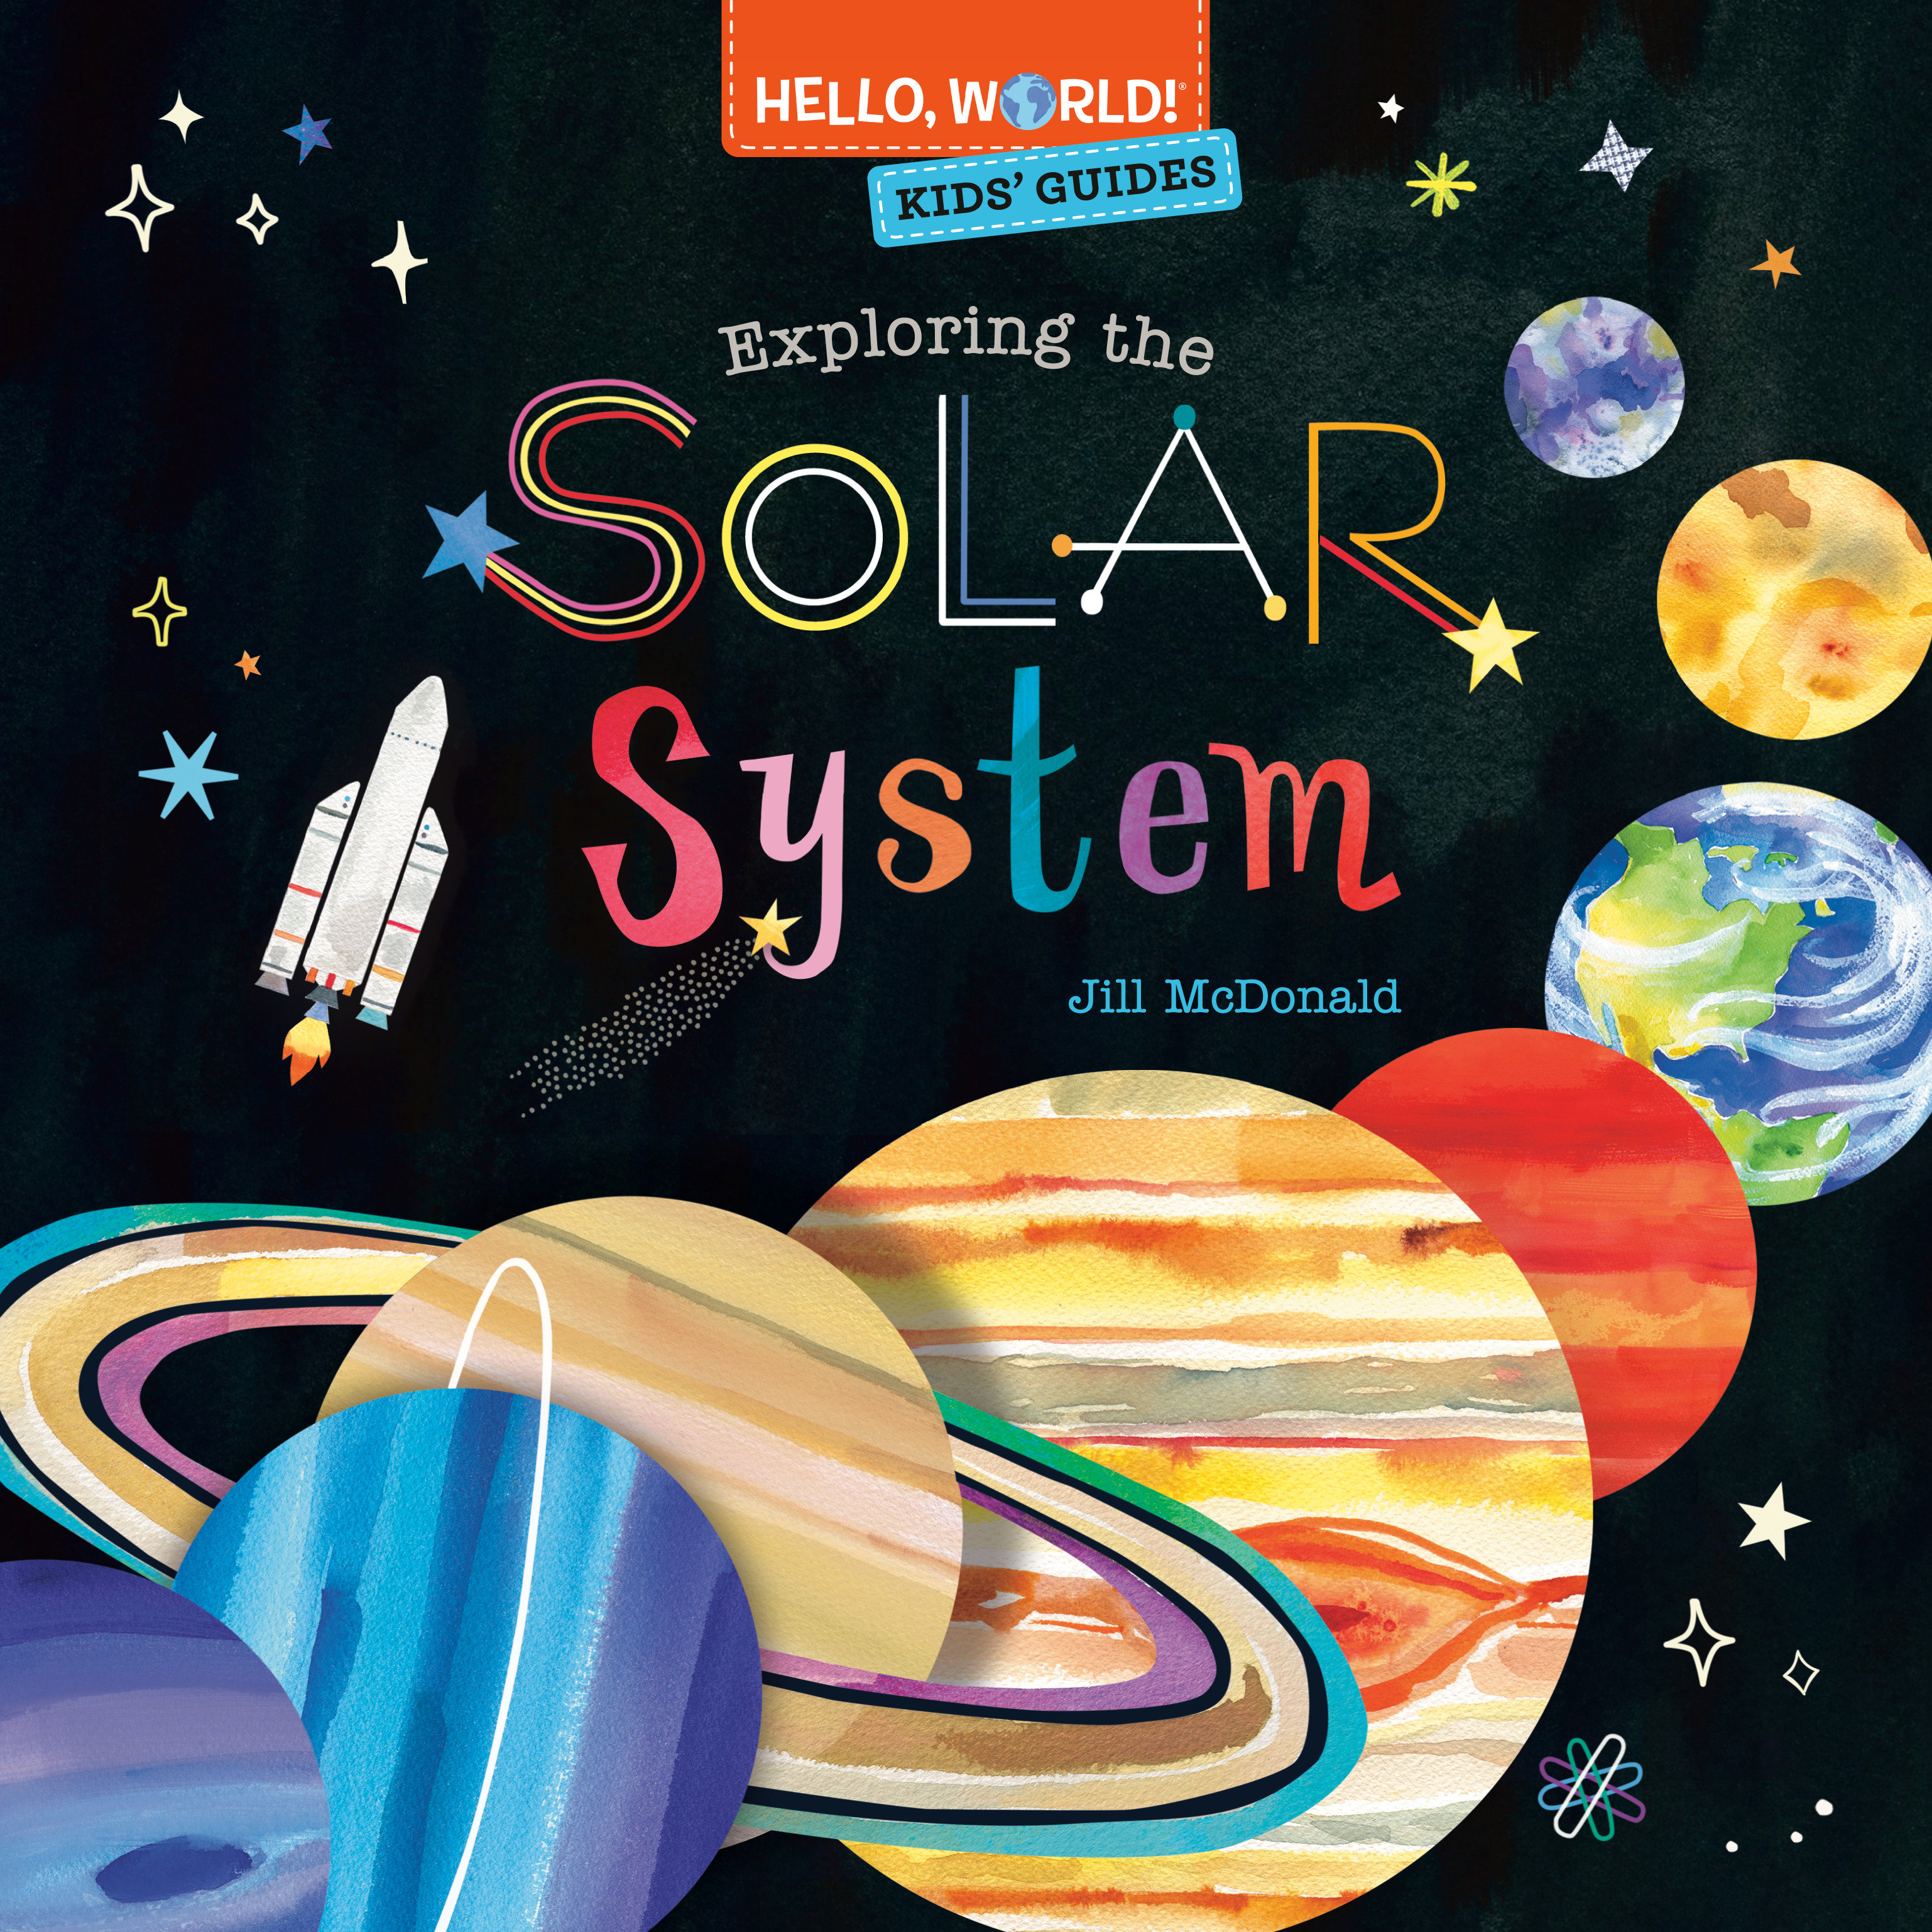 Hello, World! Kids' Guides: Exploring The Solar System (Hardcover Book)